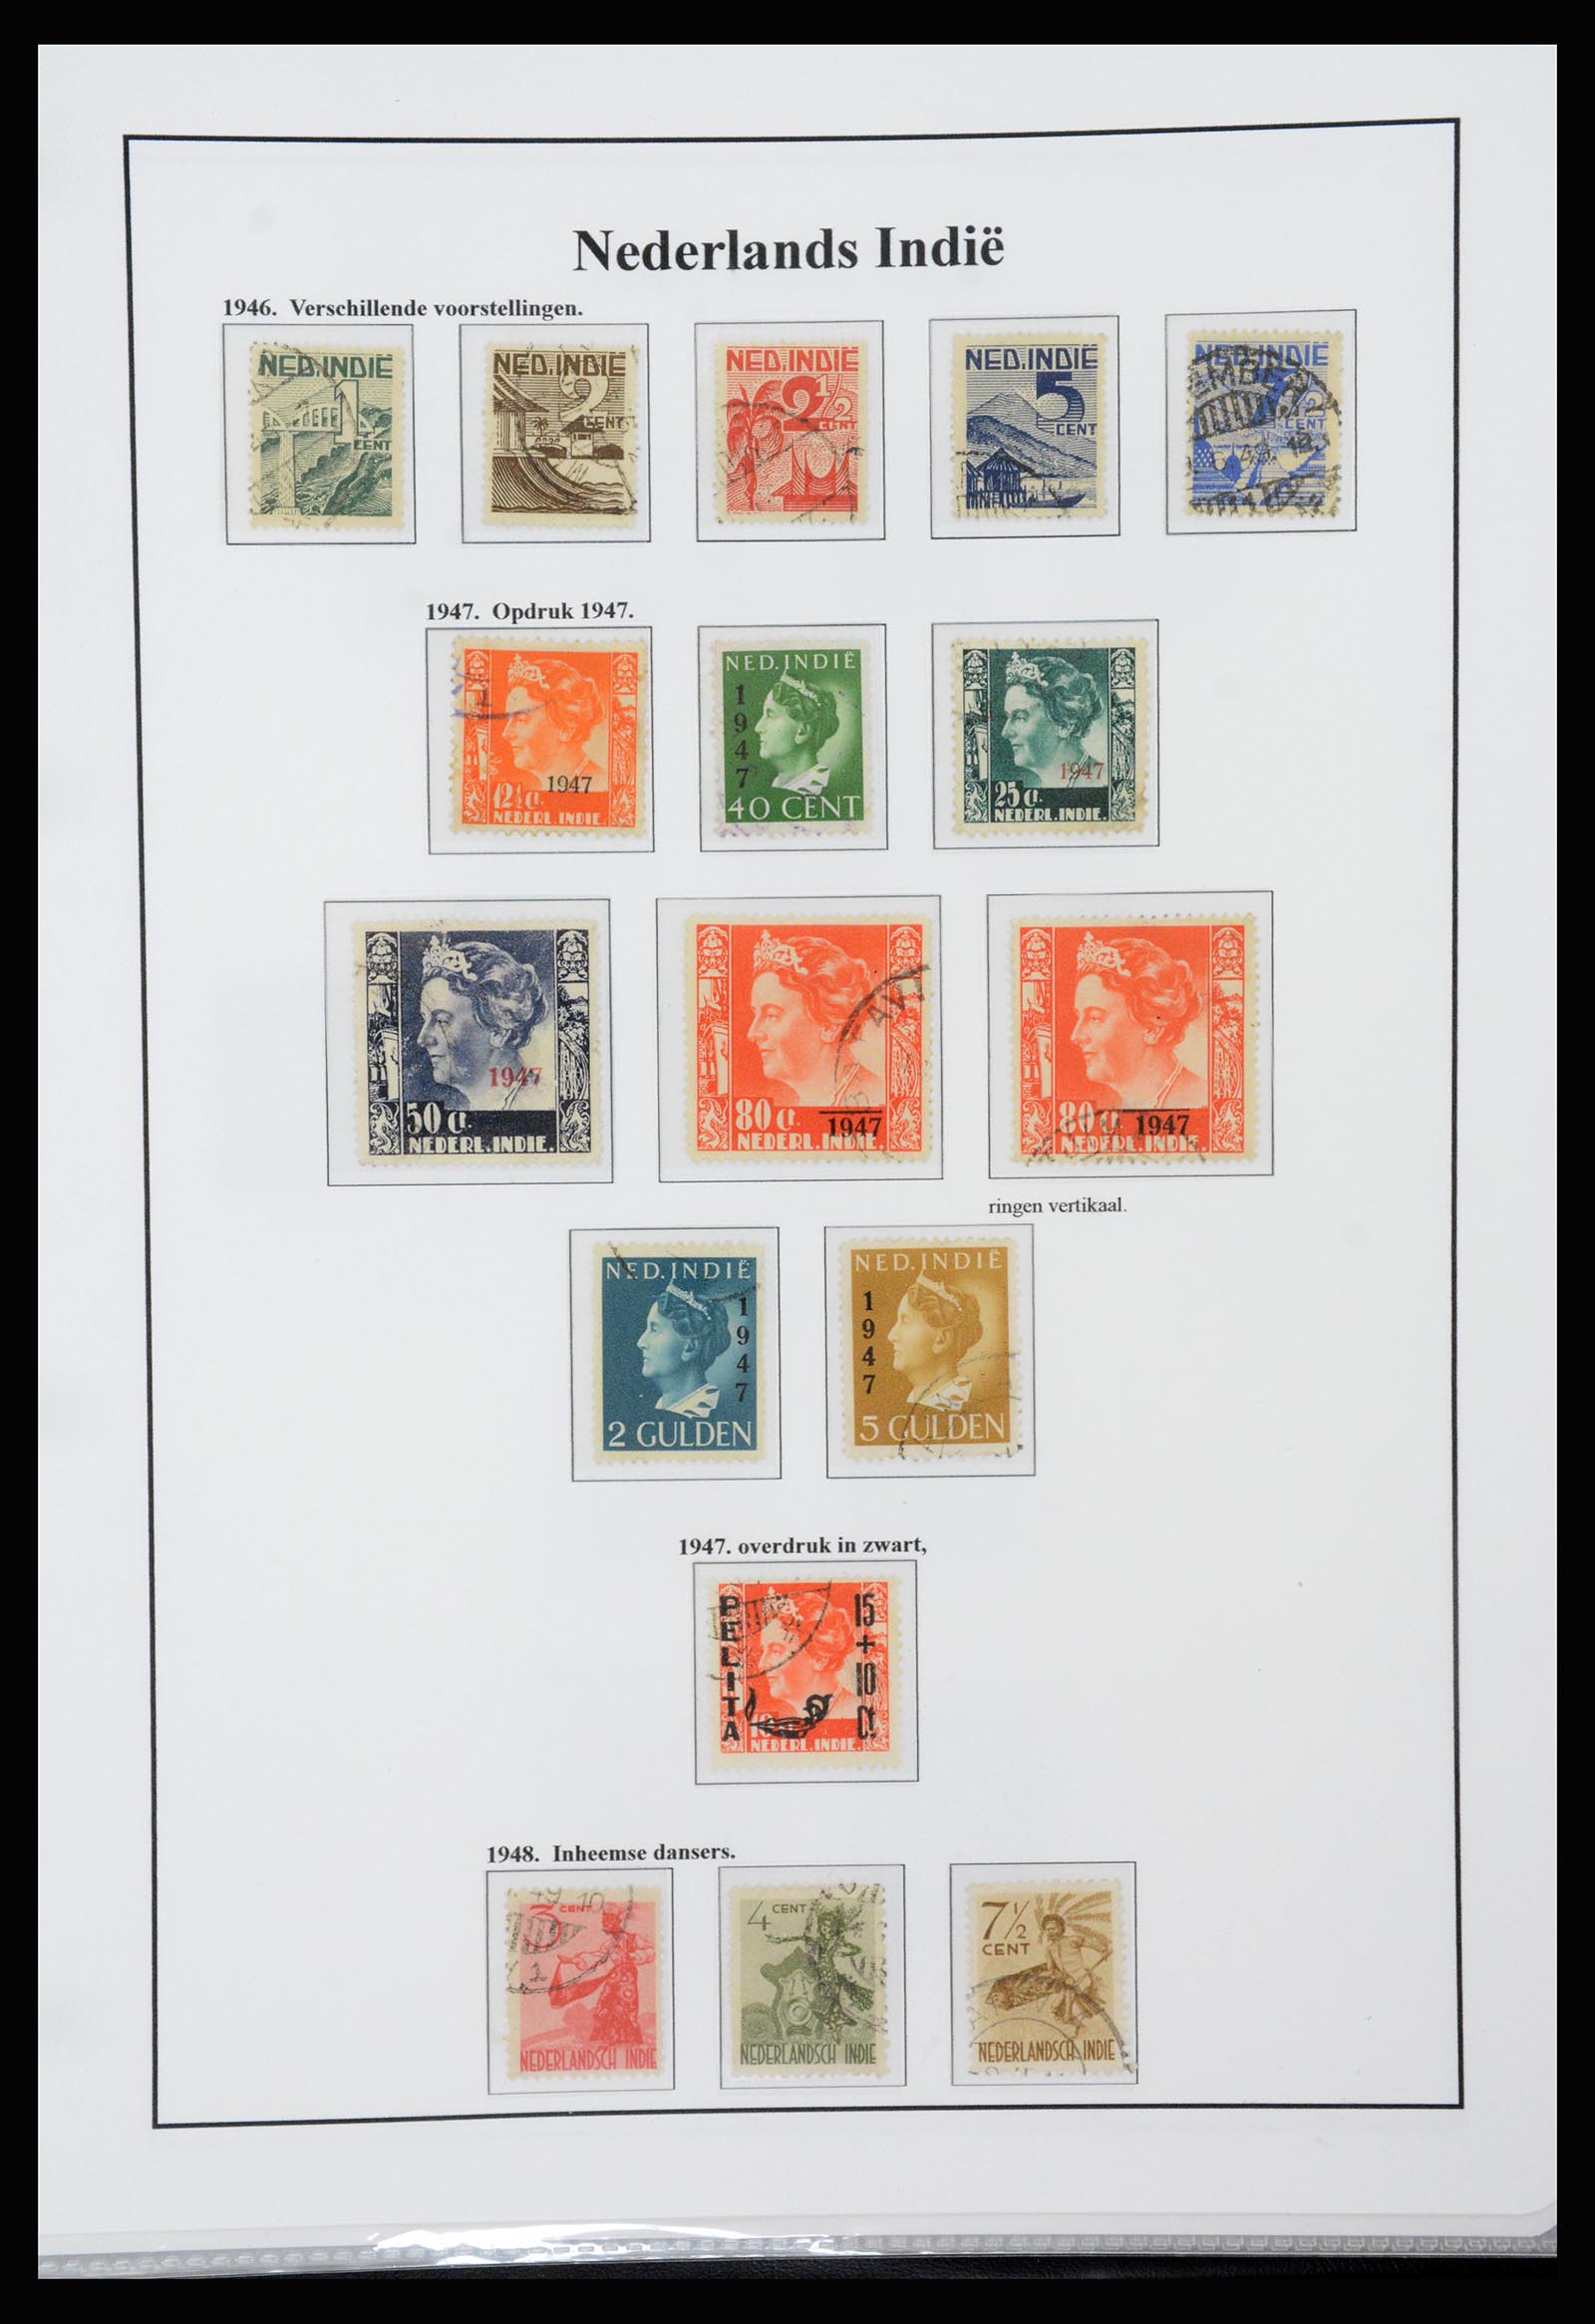 37247 026 - Stamp collection 37247 Dutch east Indies 1864-1949.